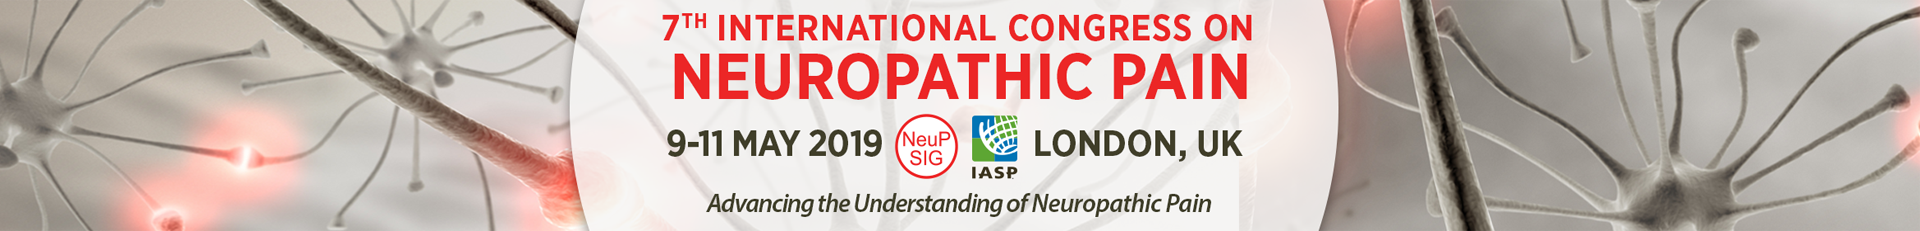  Posters - 7th International Congress on Neuropathic Pain Event Banner